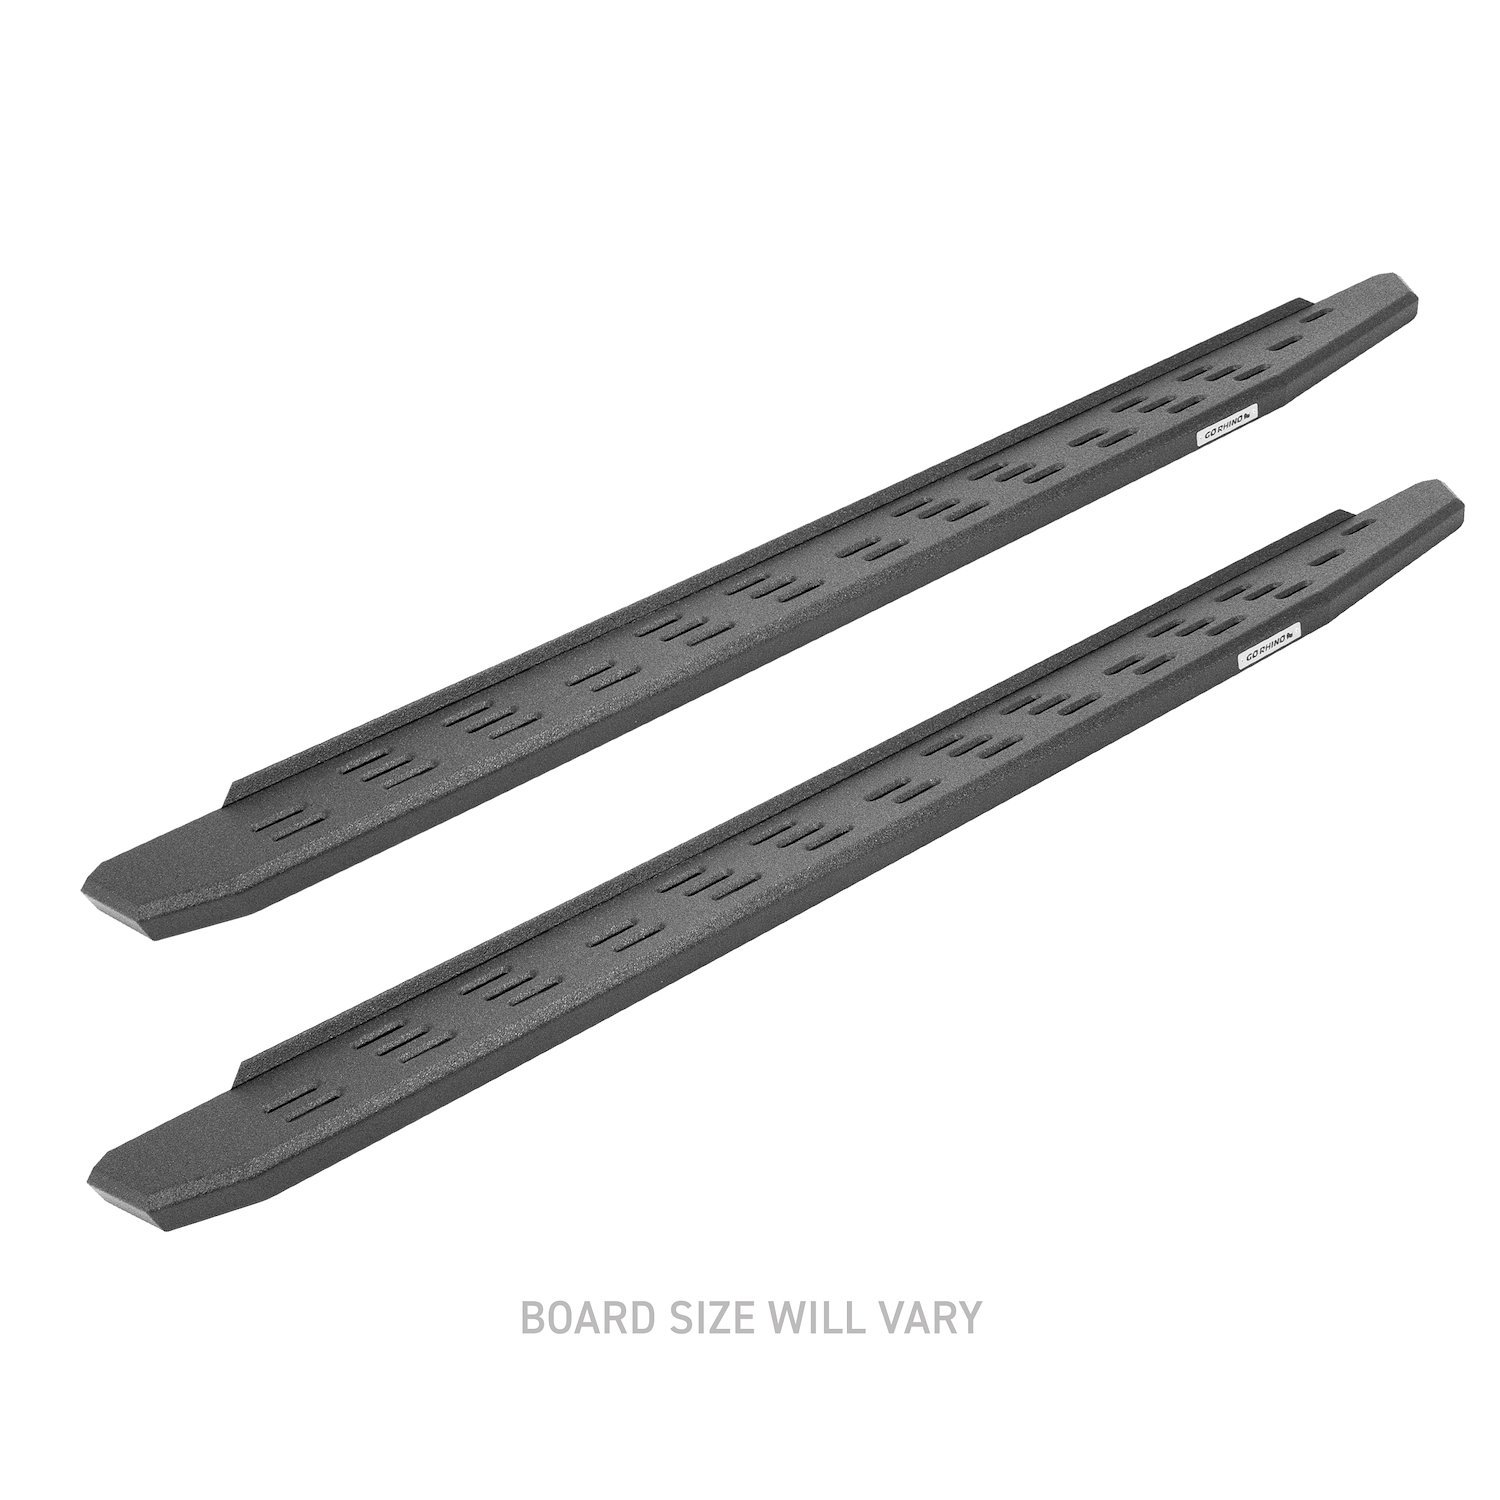 RB30 Running Boards w/Bracket Kit Fits Select Ford F-150 Crew Cab [Bedliner-Coated]